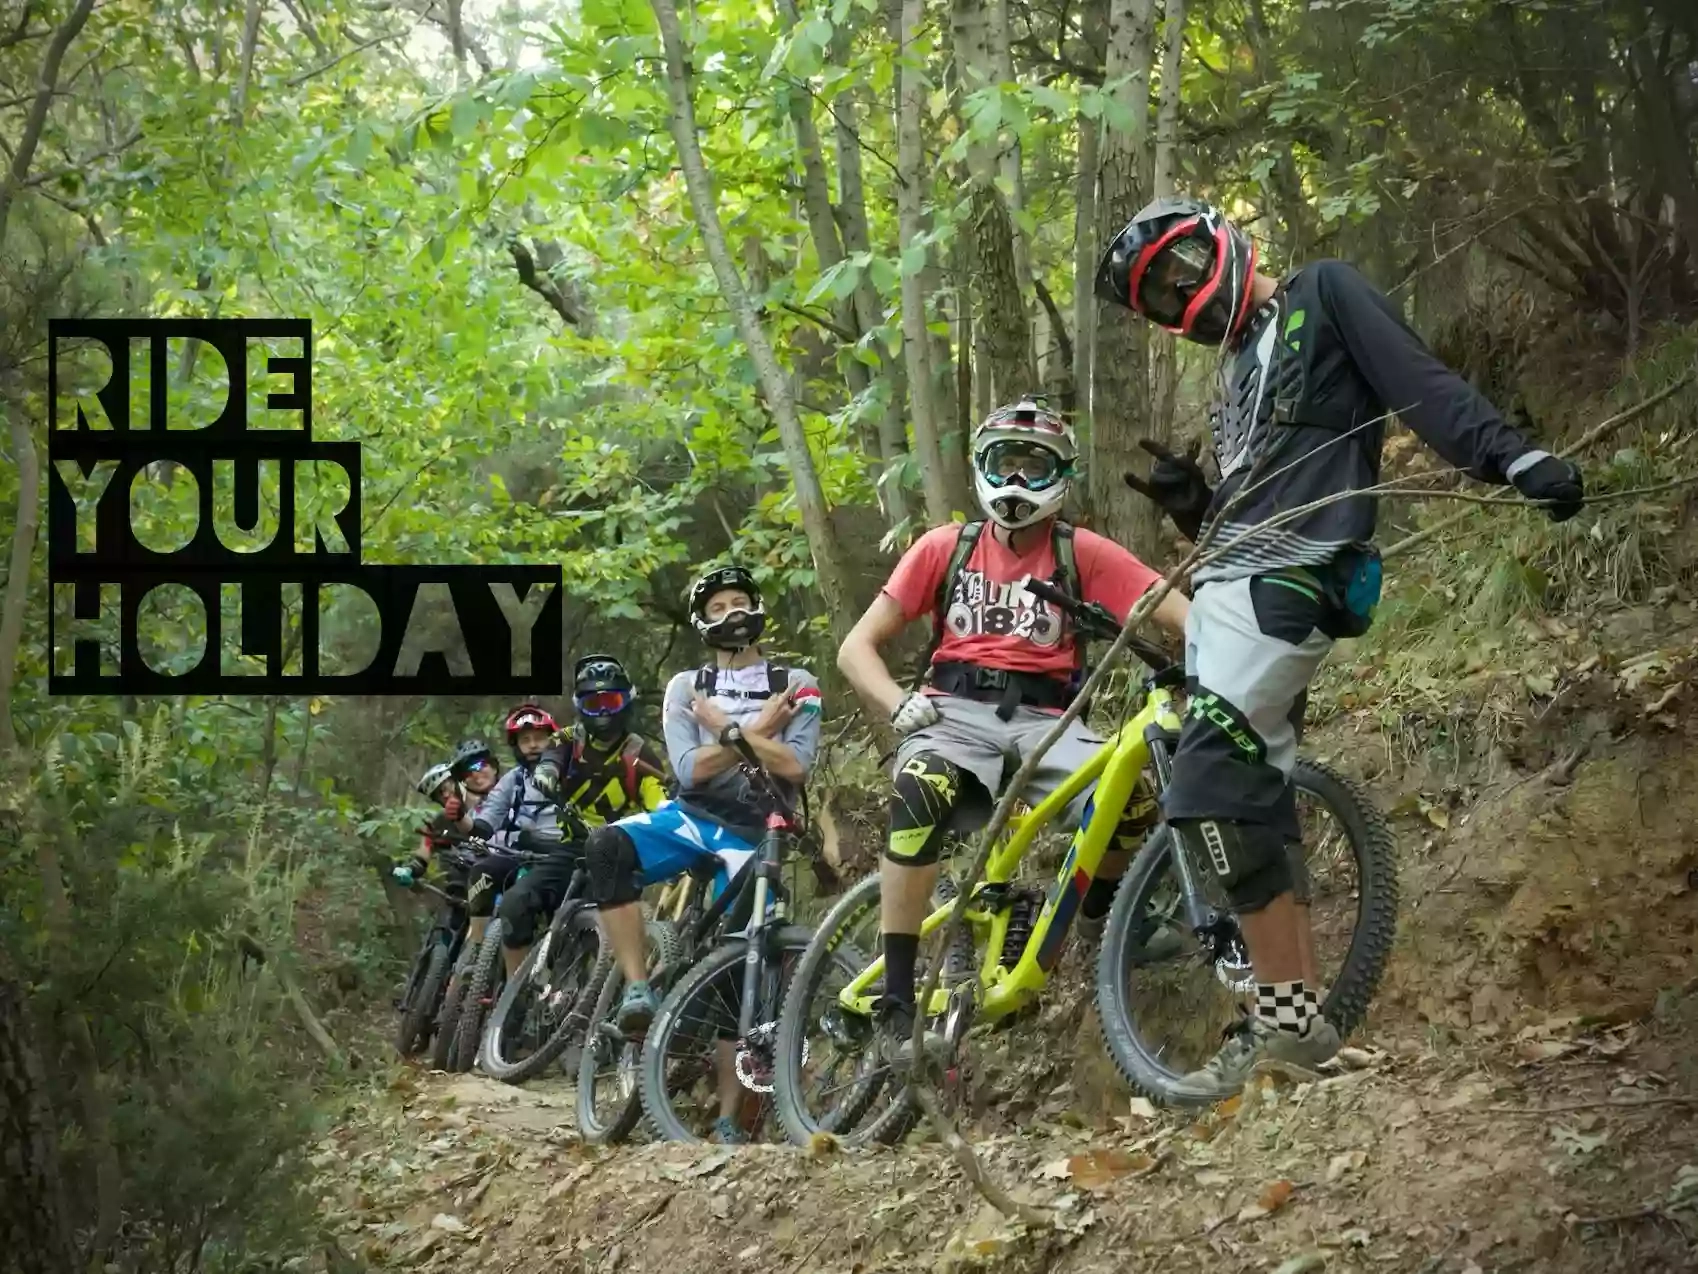 Ride your Holiday